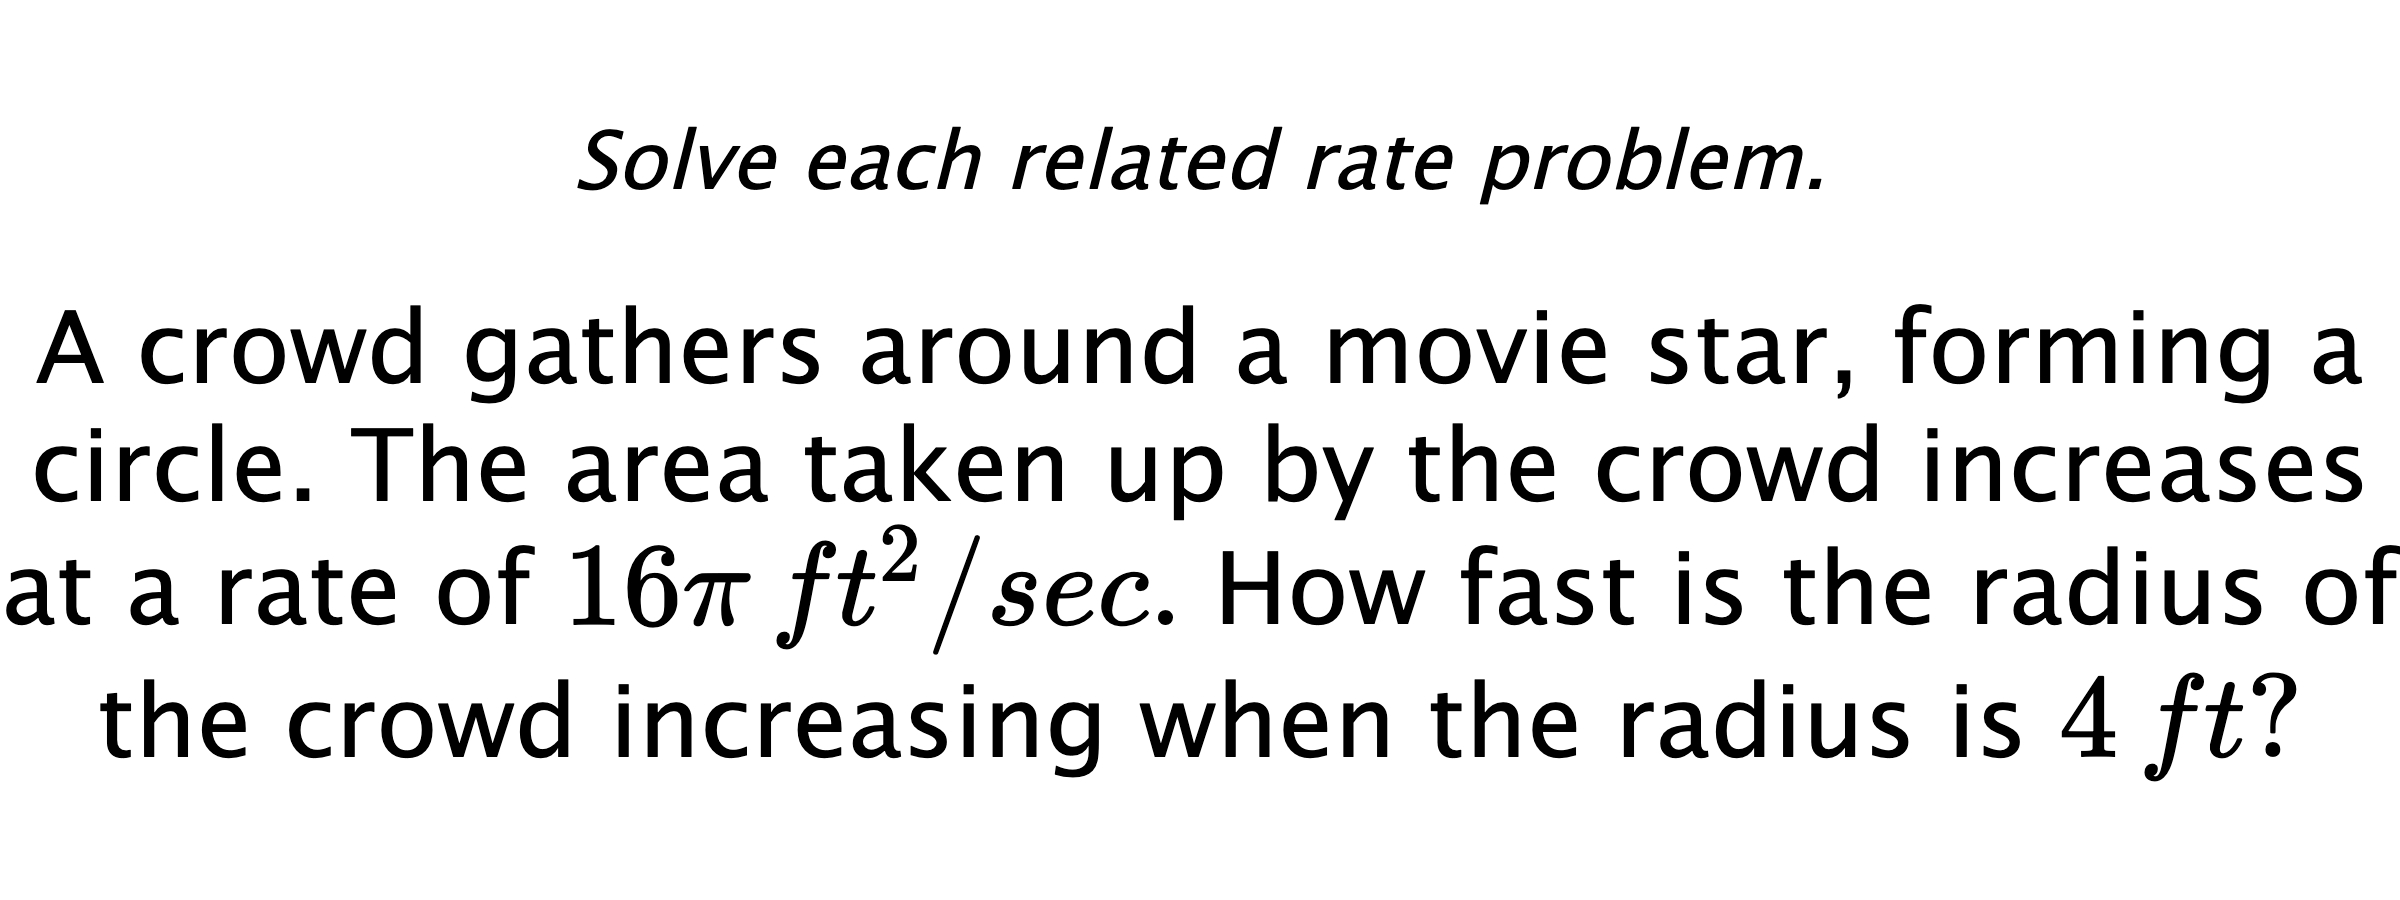 Solve each related rate problem. A crowd gathers around a movie star, forming a circle. The area taken up by the crowd increases at a rate of $16\pi\,ft^{2}/sec.$  How fast is the radius of the crowd increasing when the radius is $4\,ft?$